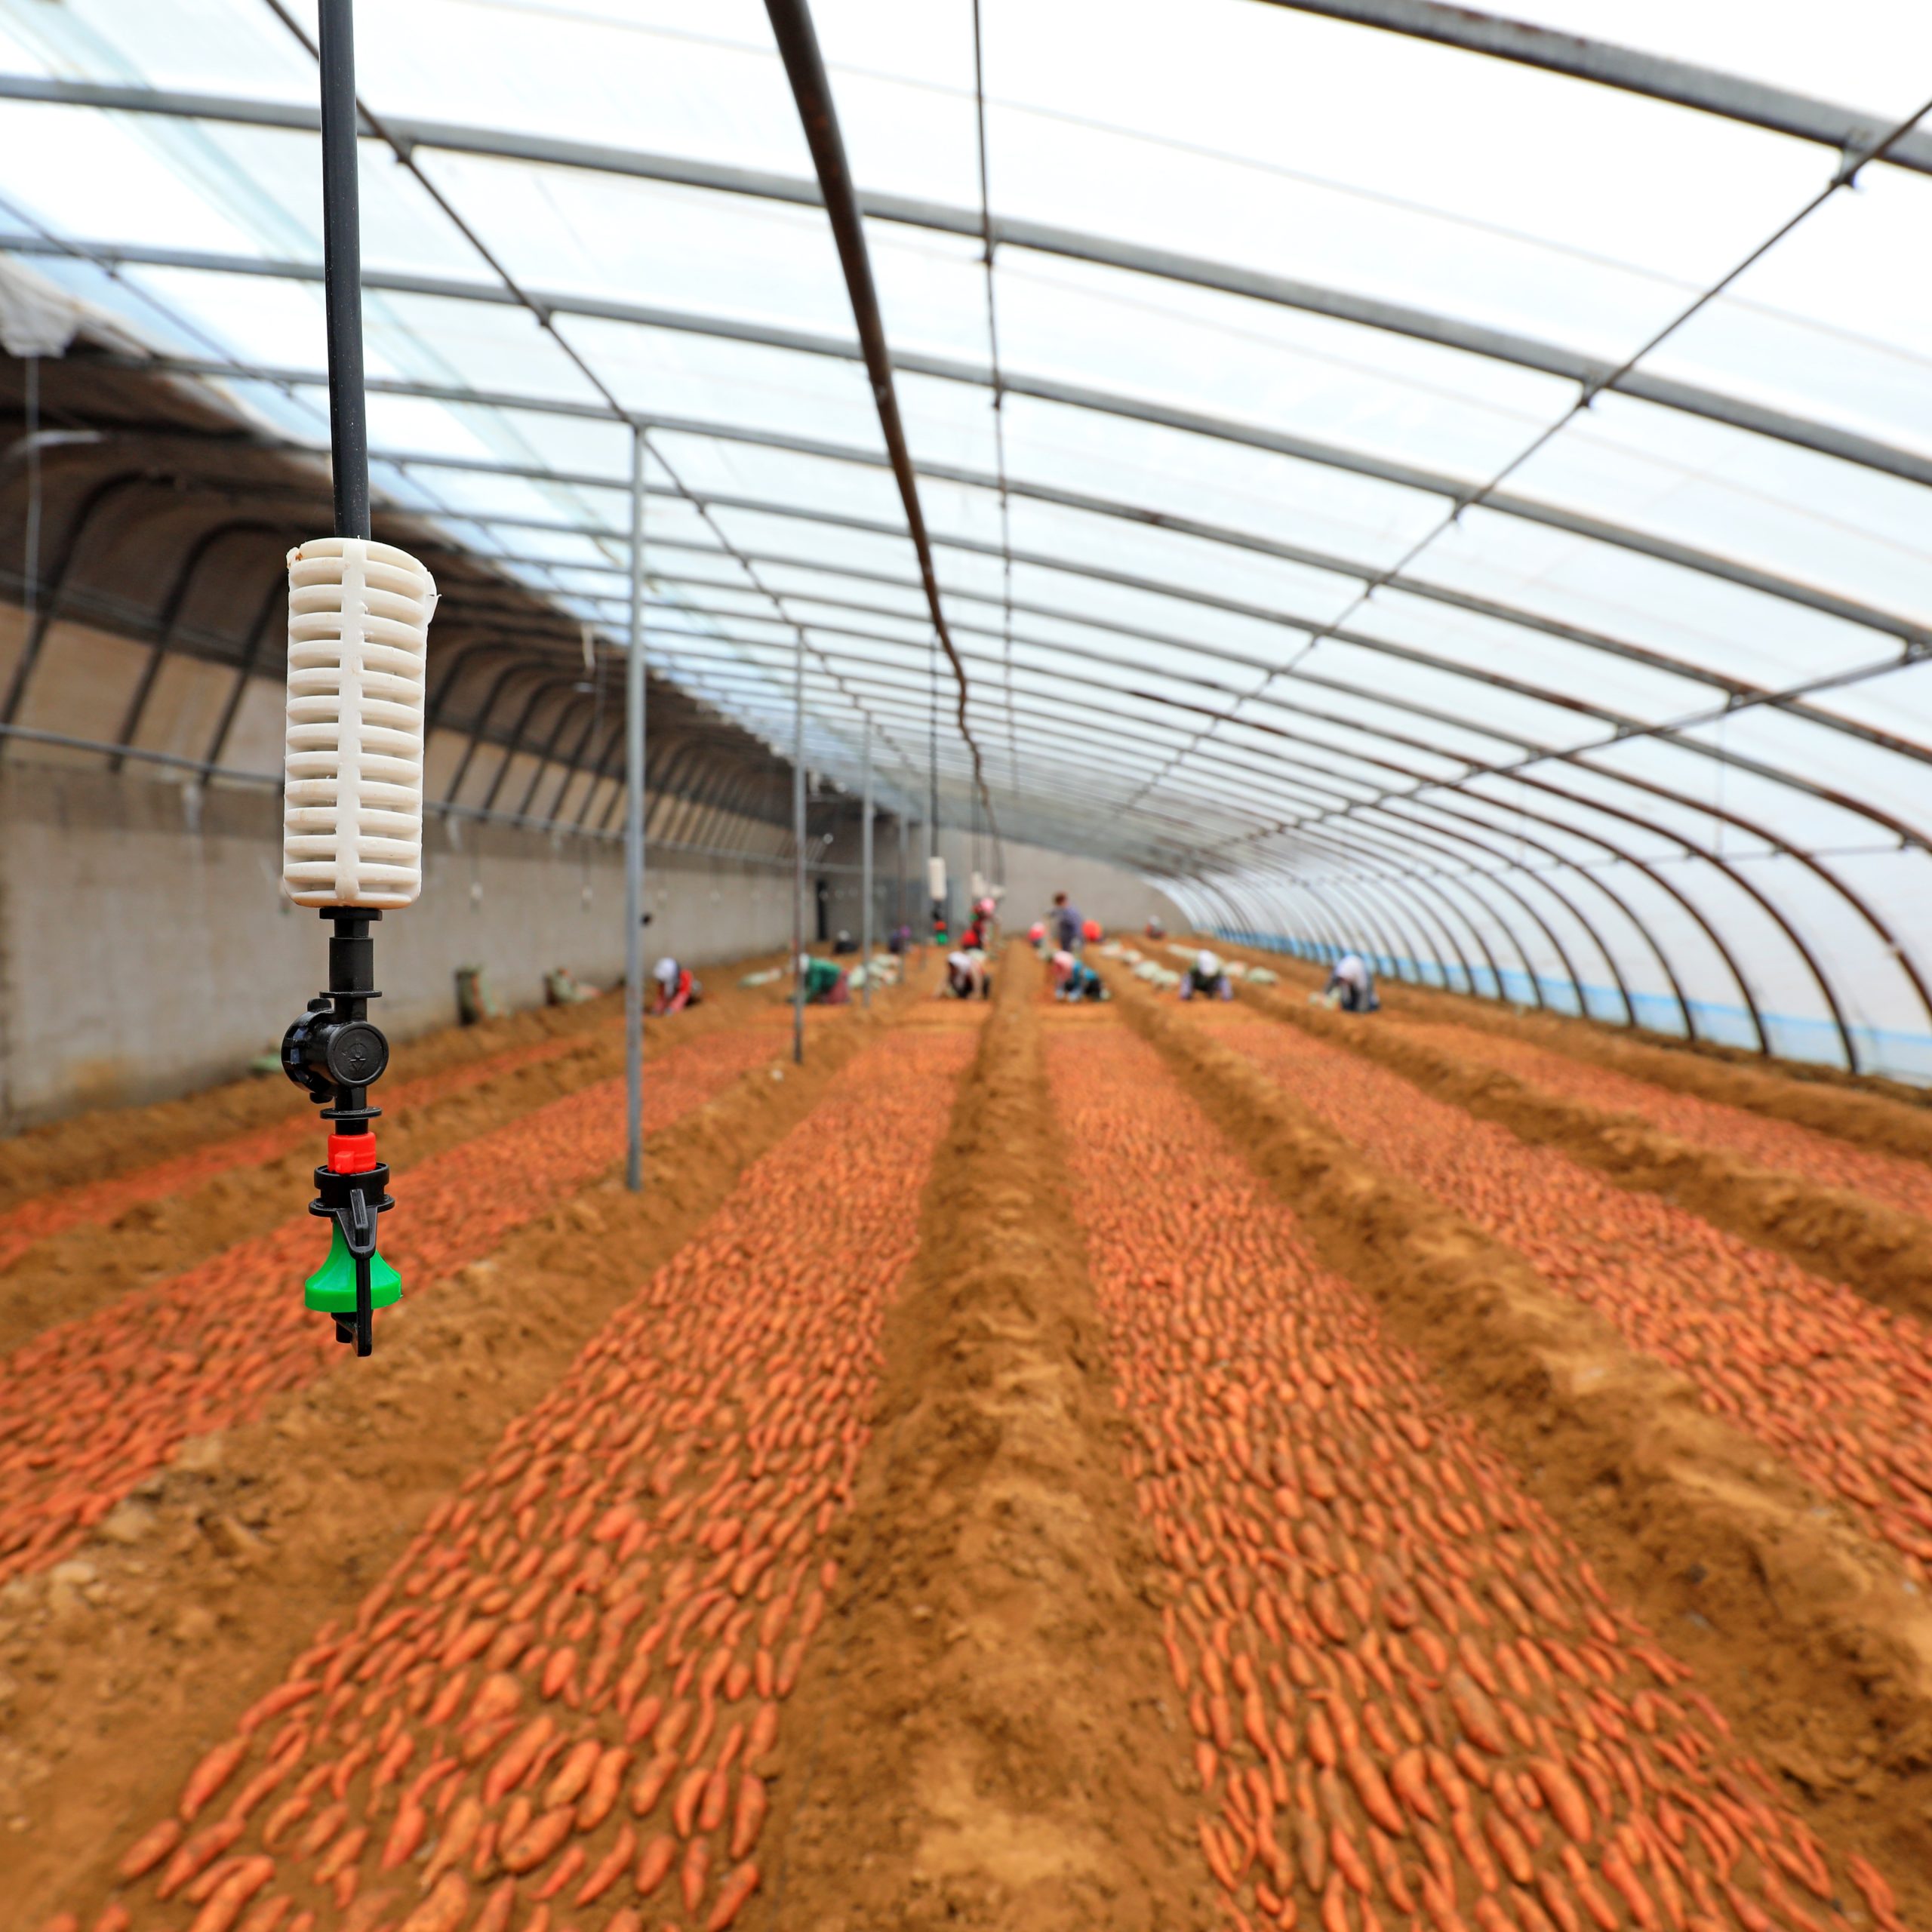 LUANNAN COUNTY, Hebei Province, China - February 23, 2021: Farmers put sweet potato seedling beds in greenhouses, North China